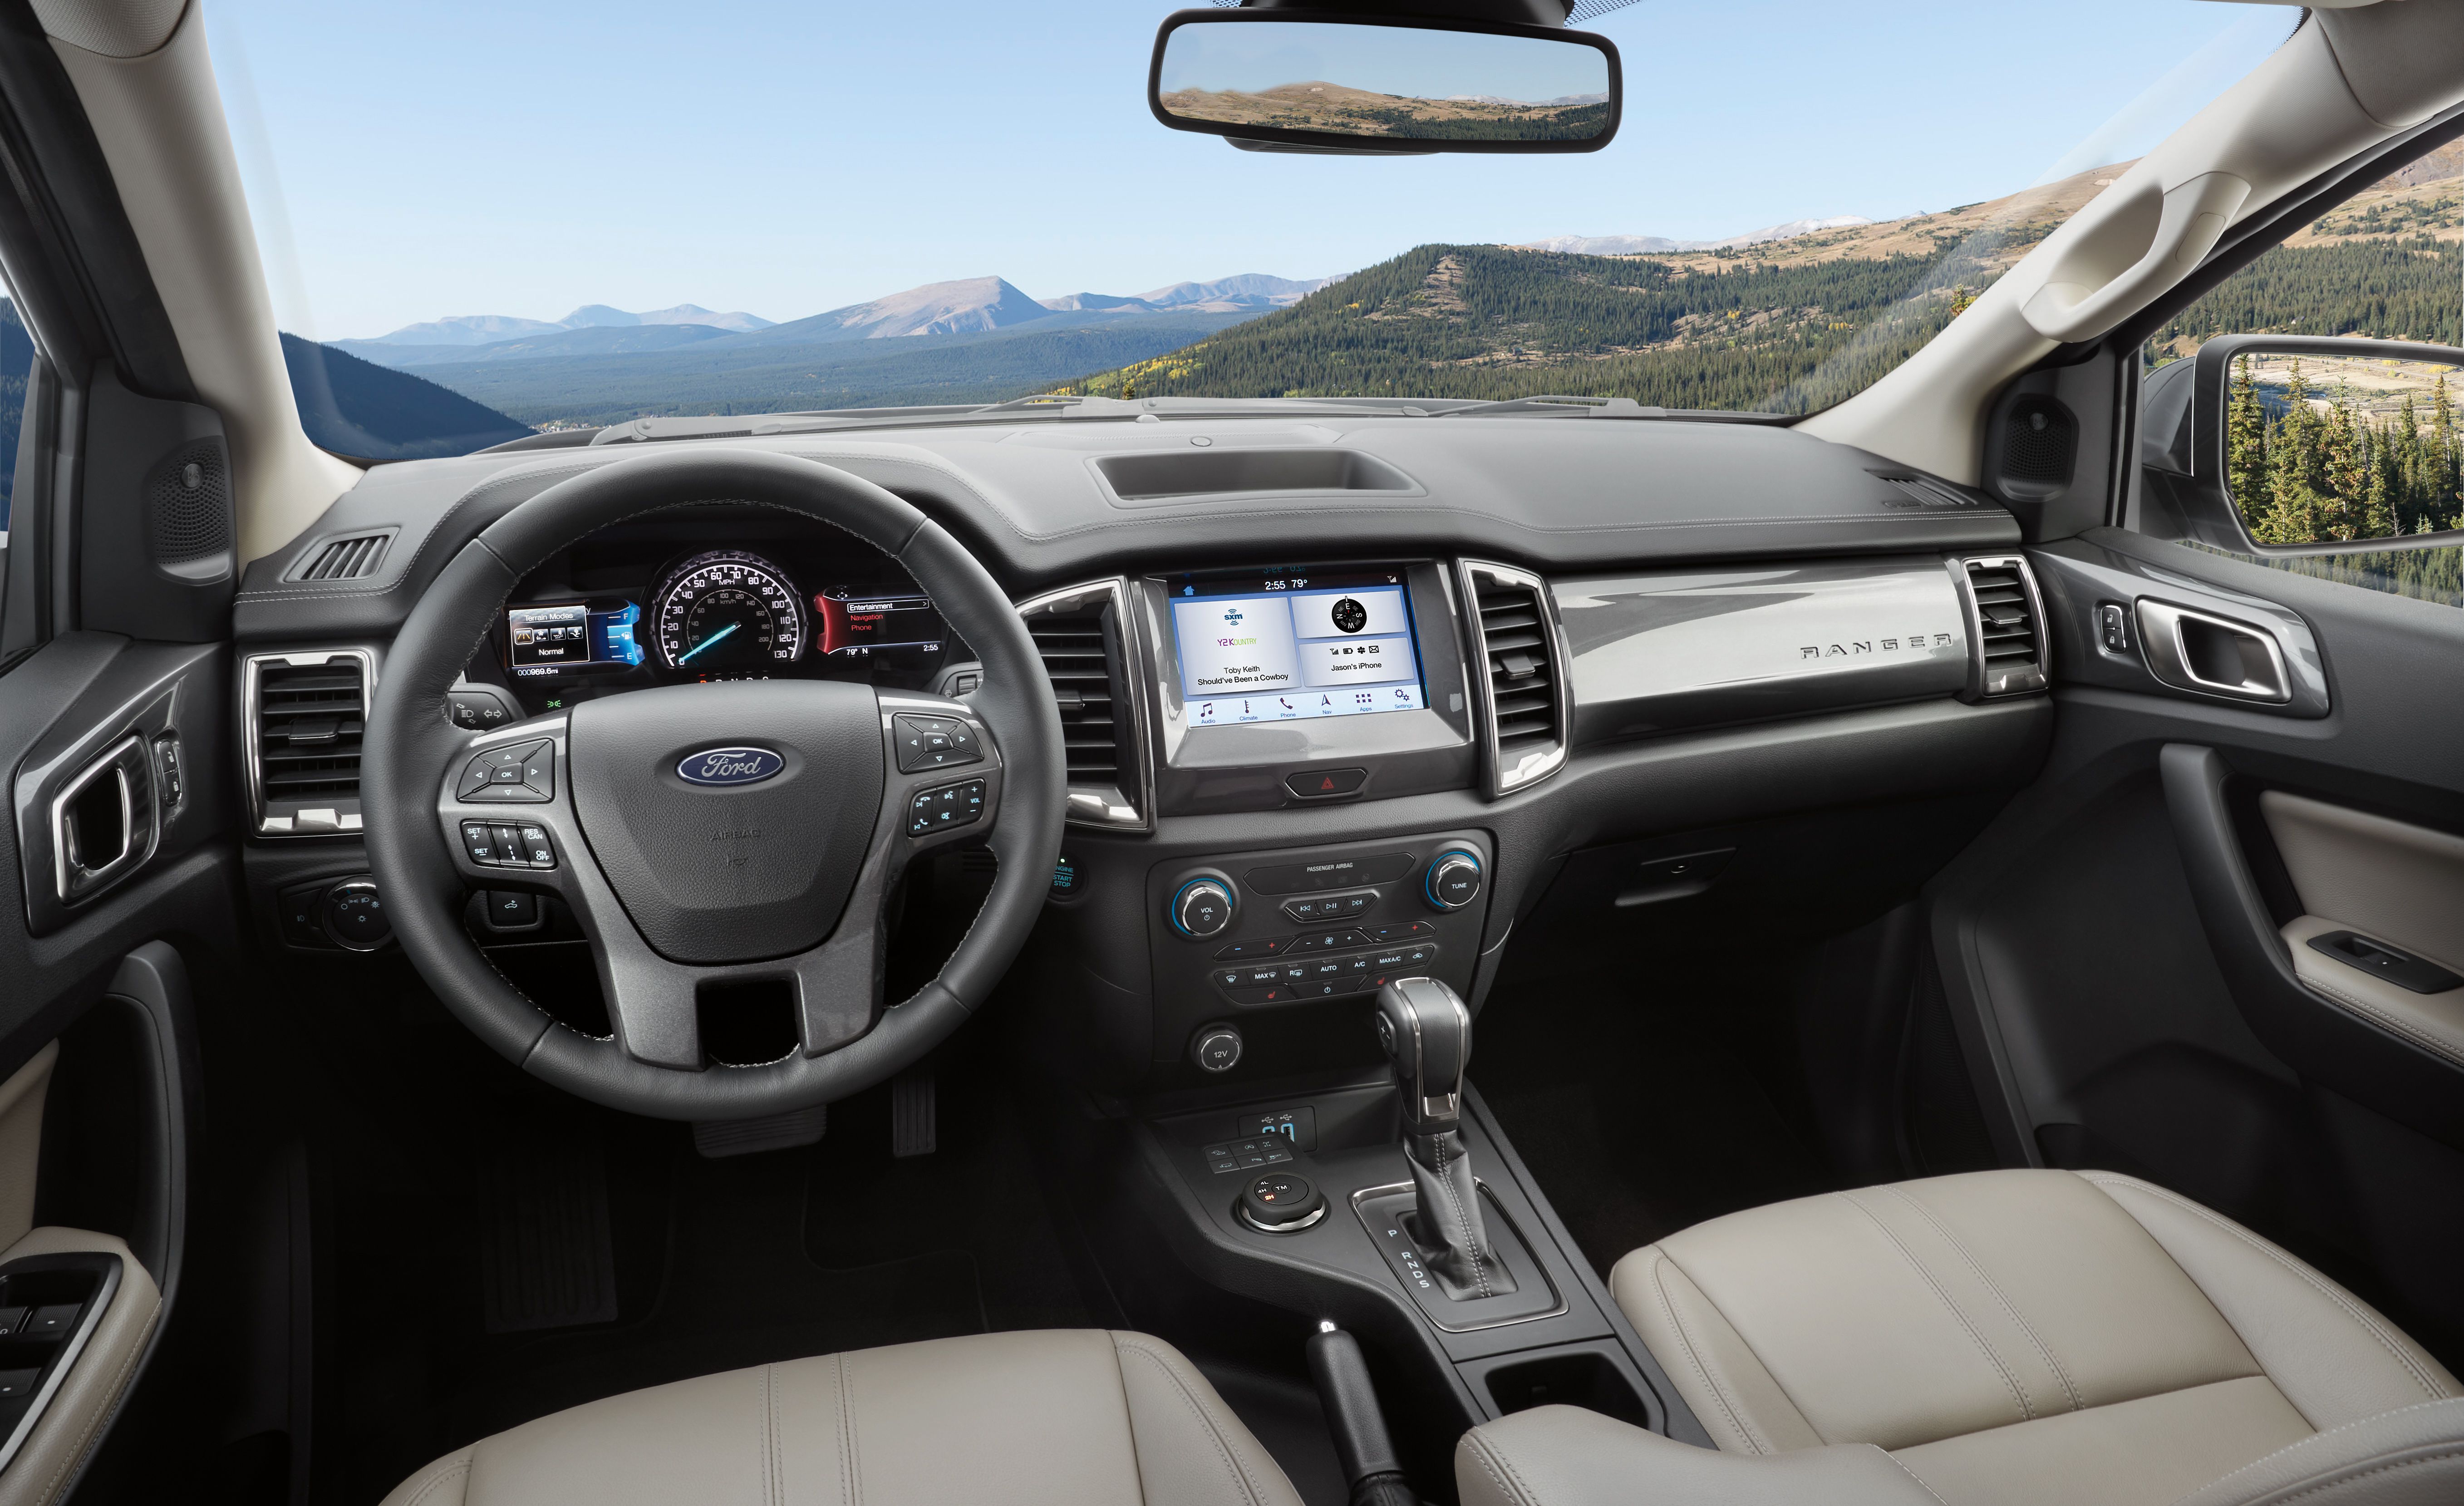 2019 Ford Ranger Interior Cockpit Wallpapers #23 of 27